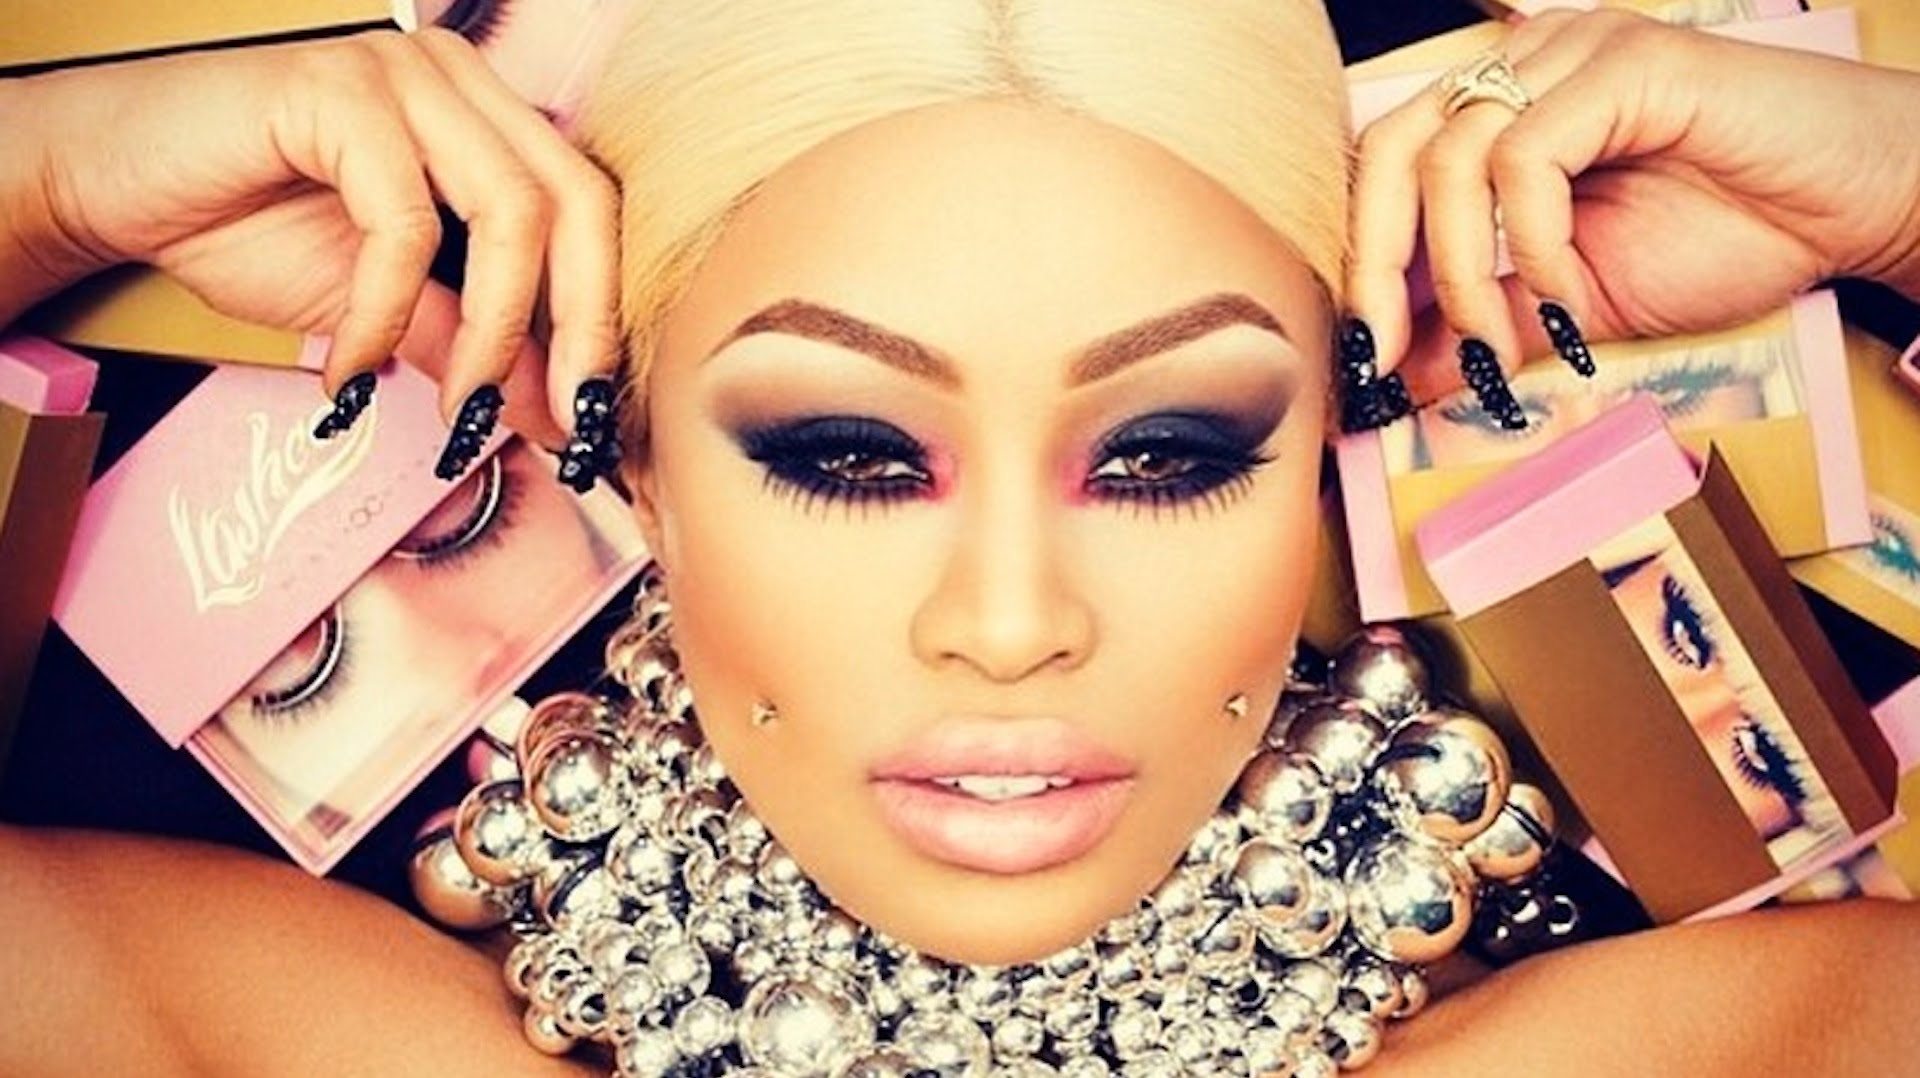 Everything You Need To Know About Blac Chyna Before The Fame1920 x 1078